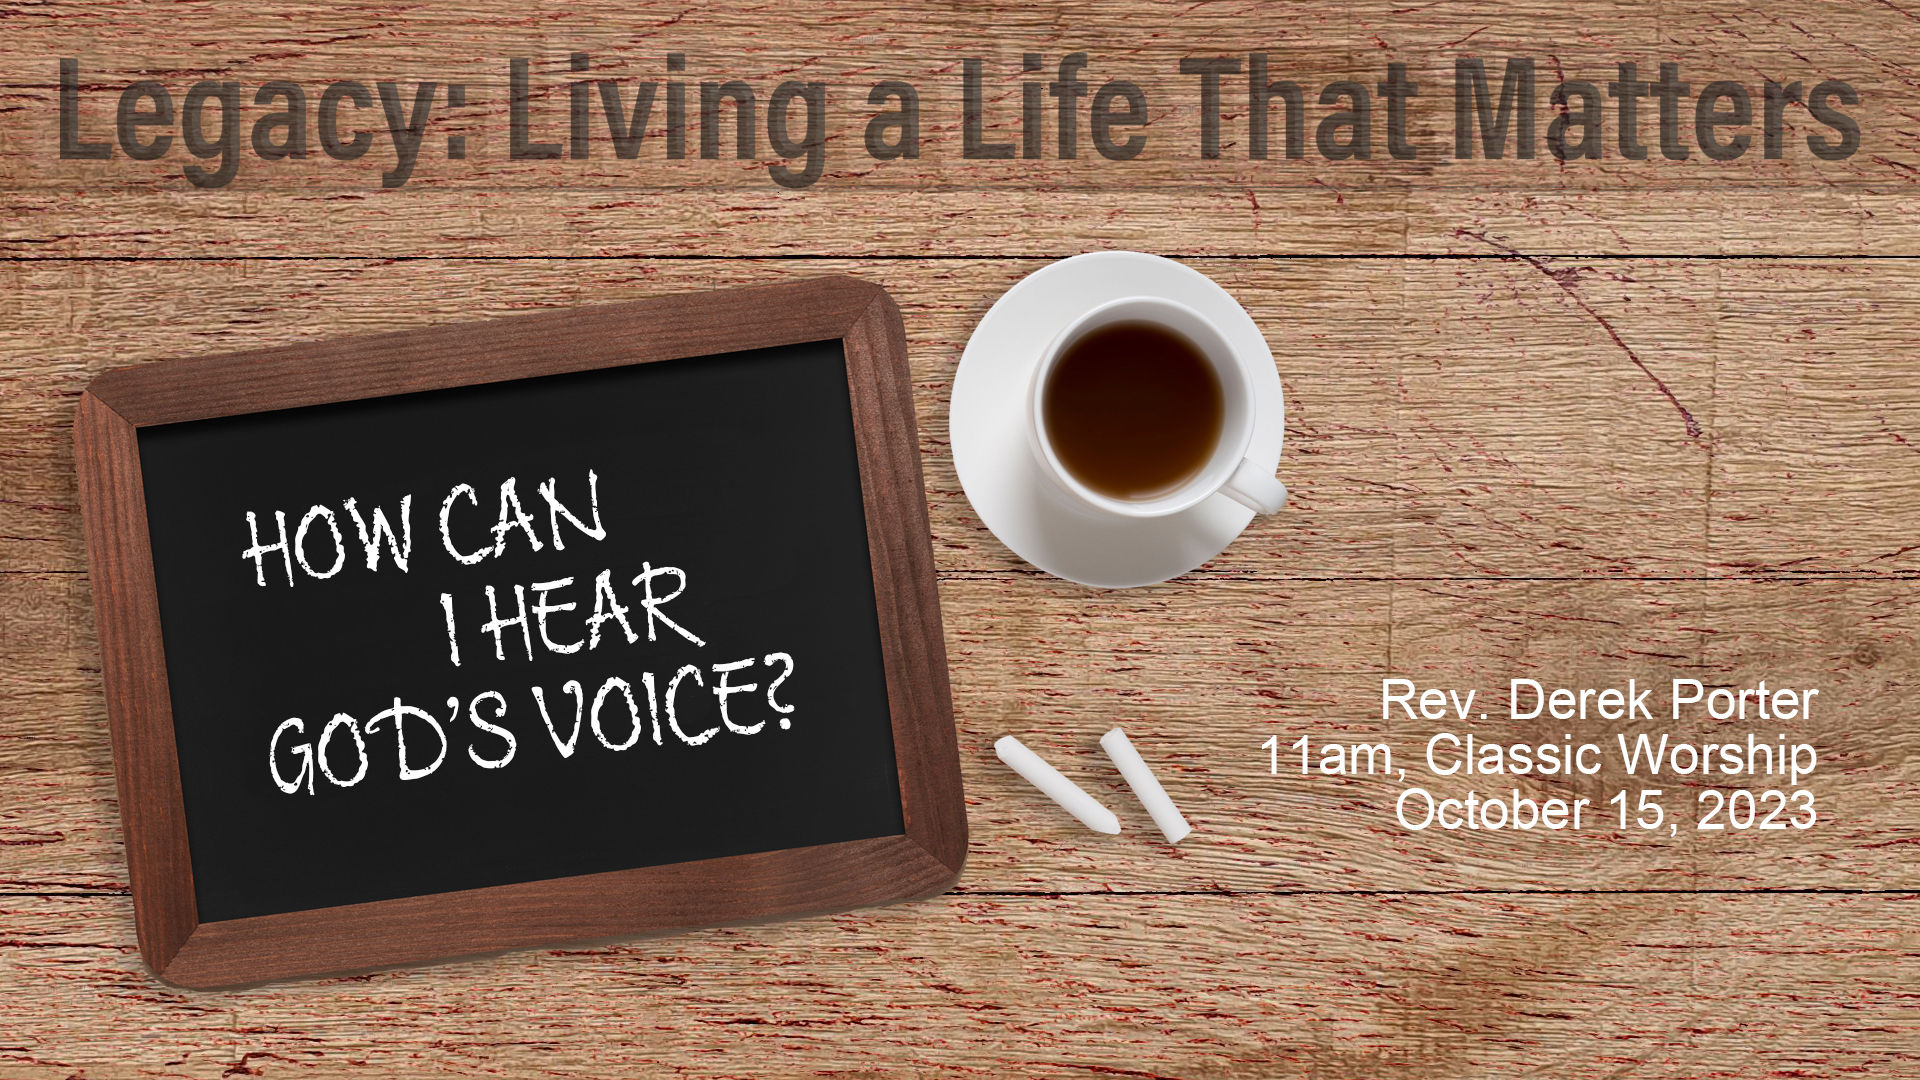 Legacy: Living a Life That Matters - How Can I Hear God's Voice?